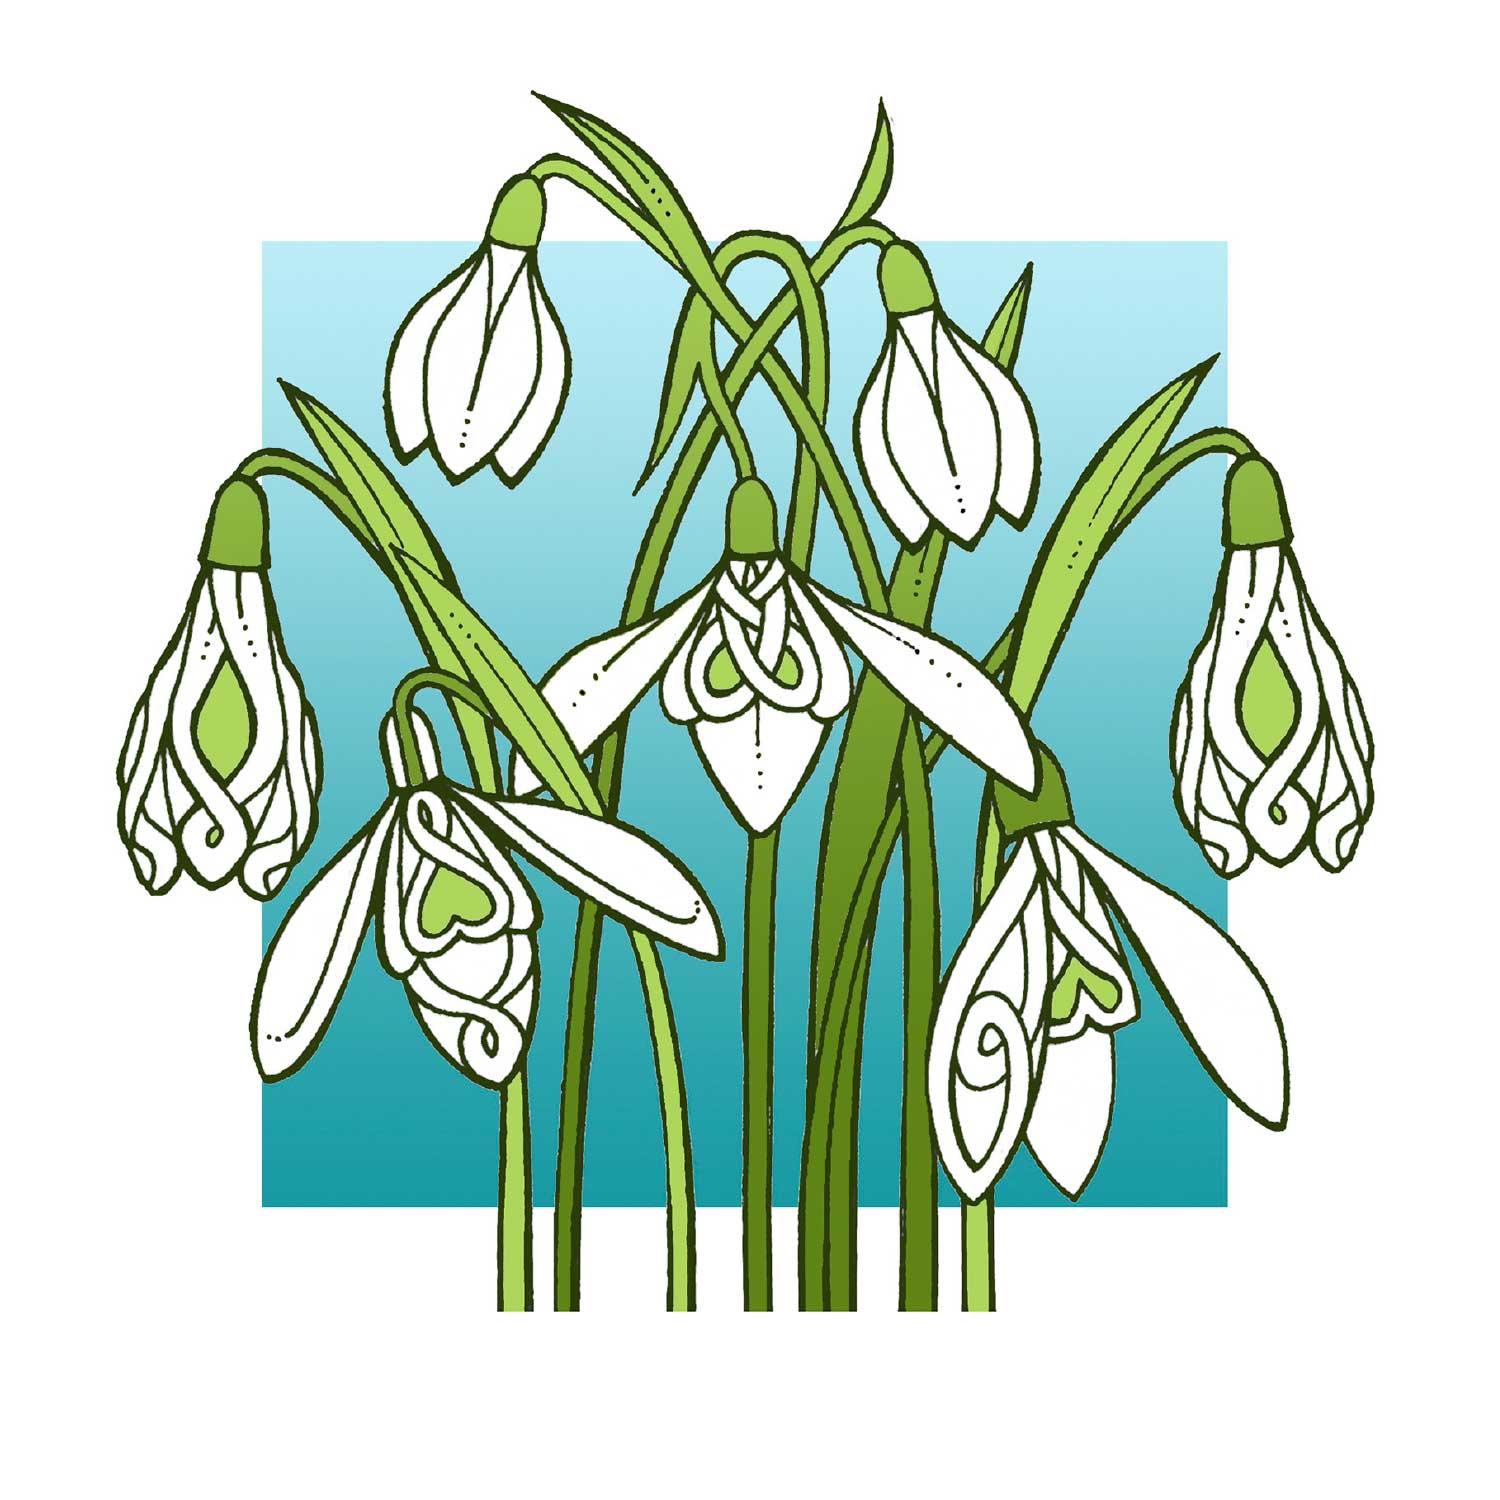 Snowdrops by Marjory Tait